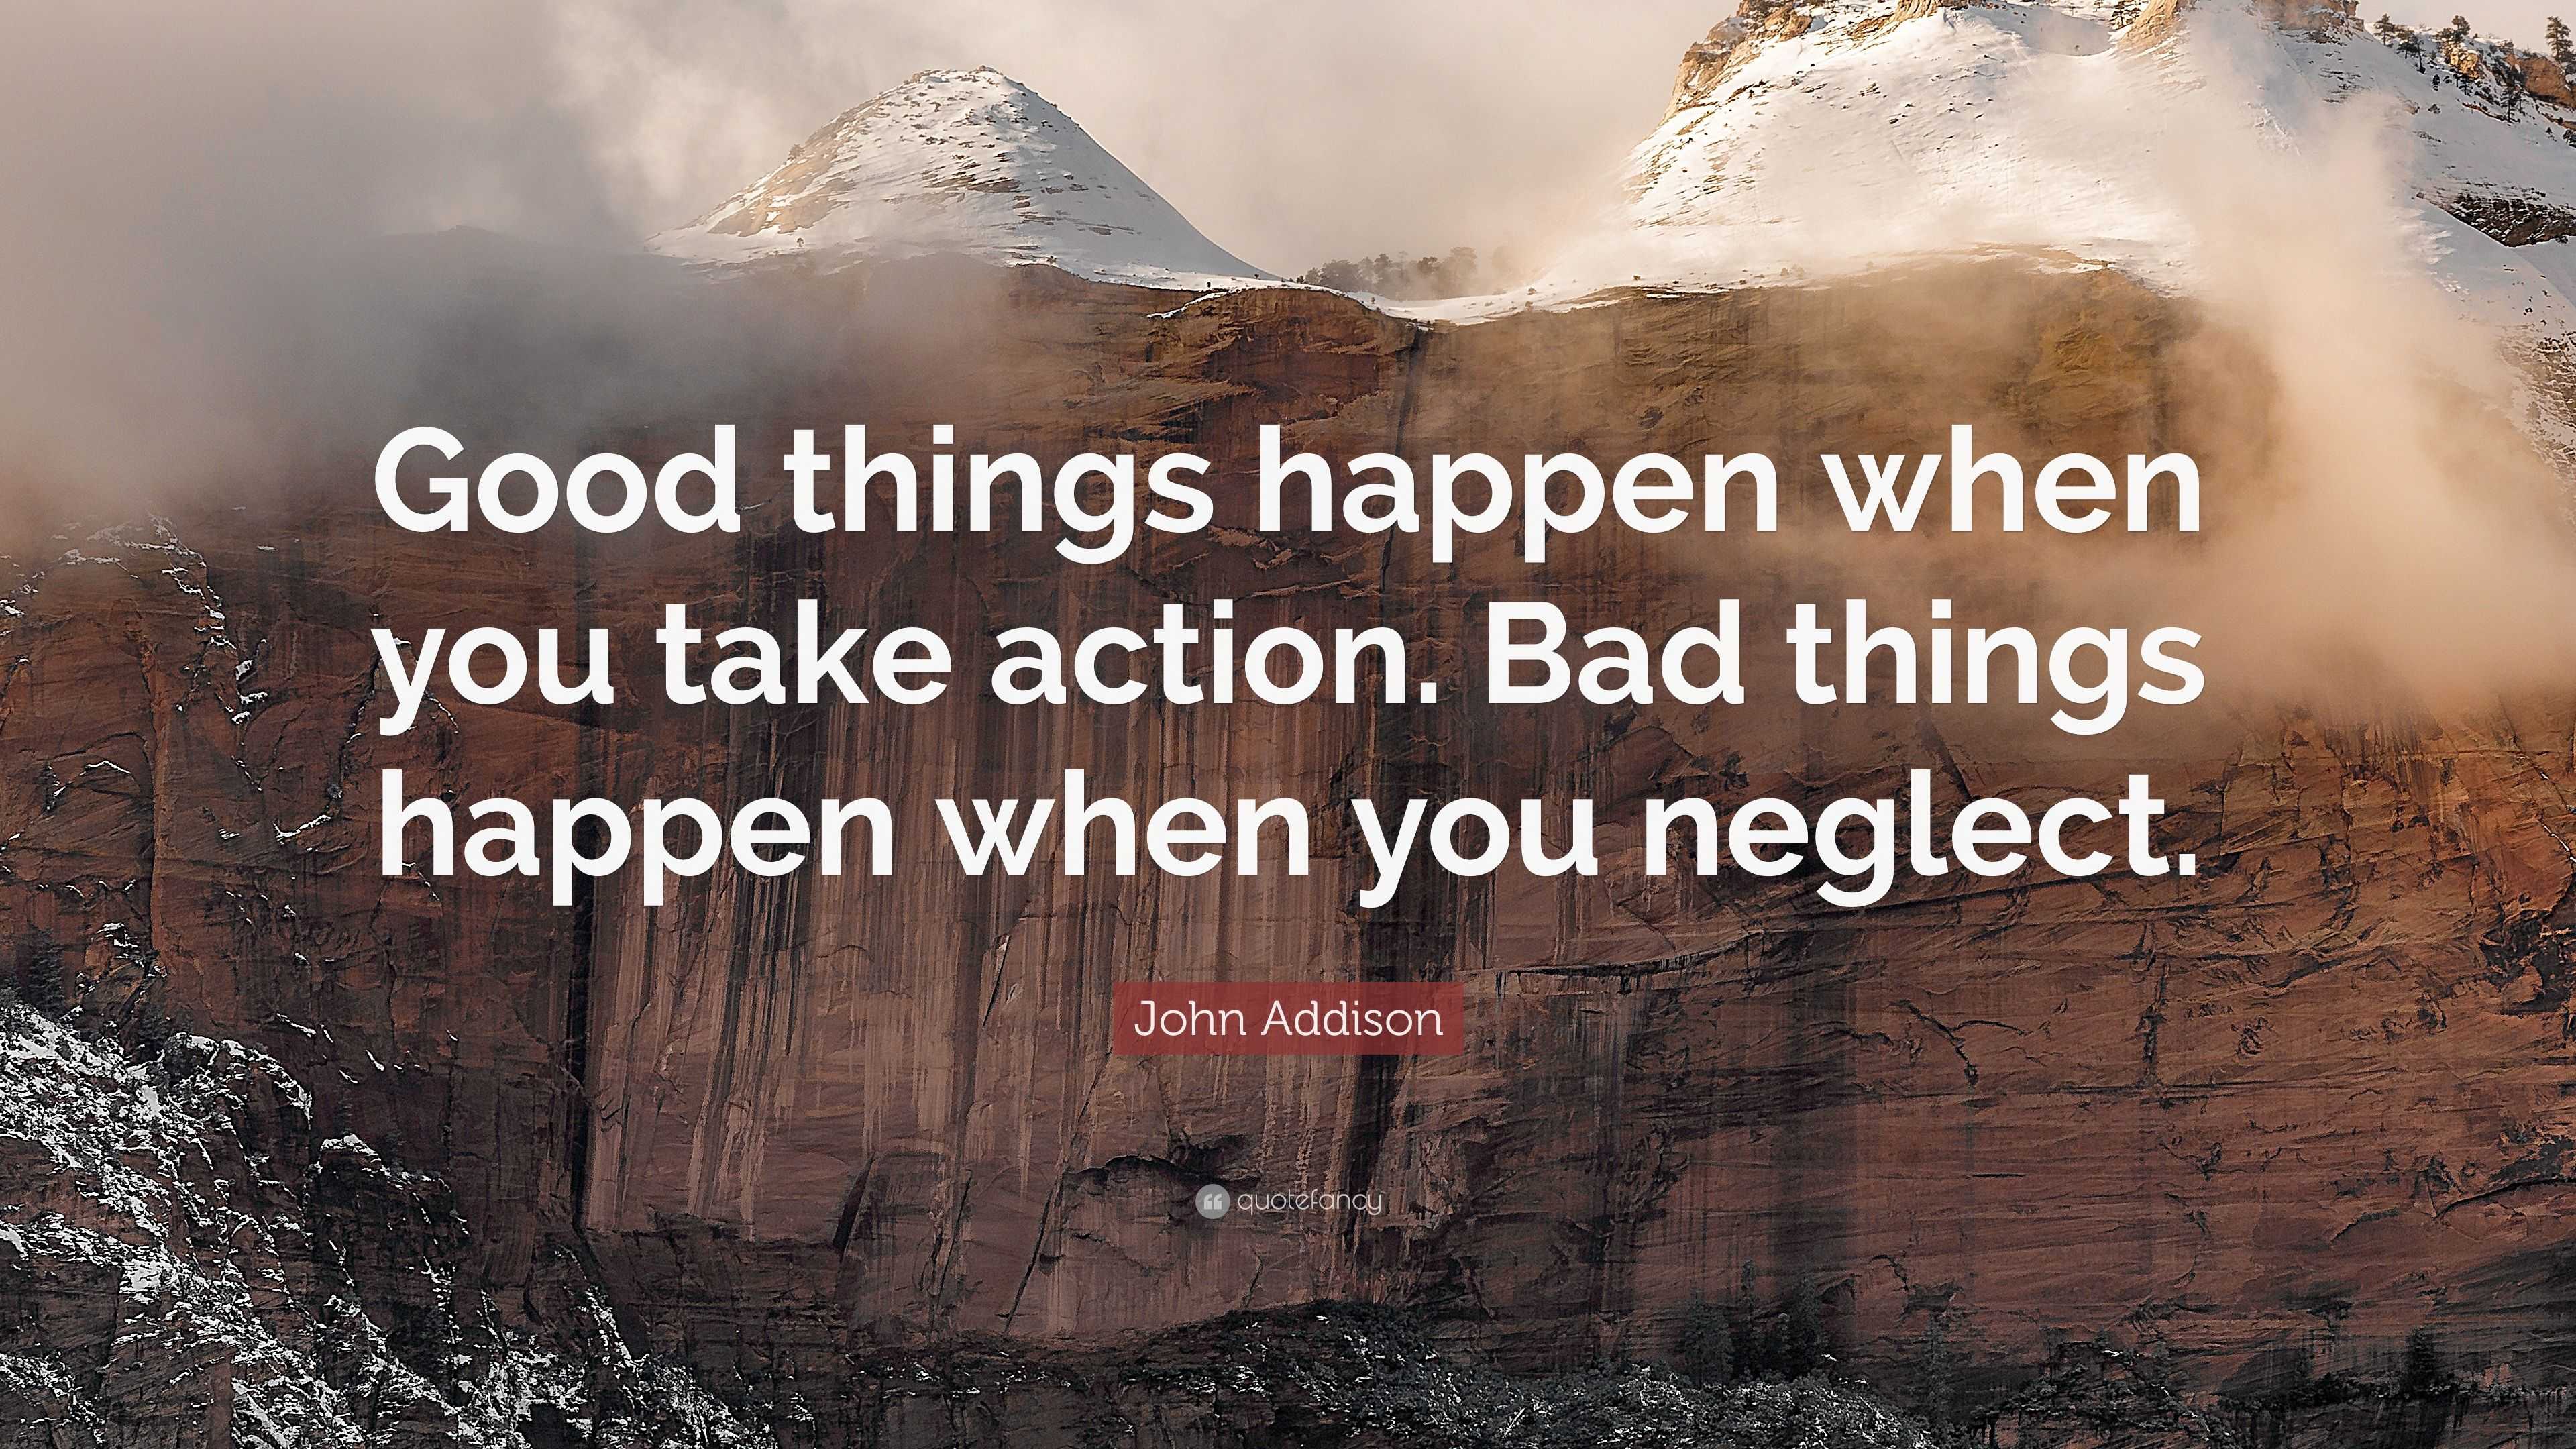 John Addison Quote “good Things Happen When You Take Action Bad Things Happen When You Neglect ”